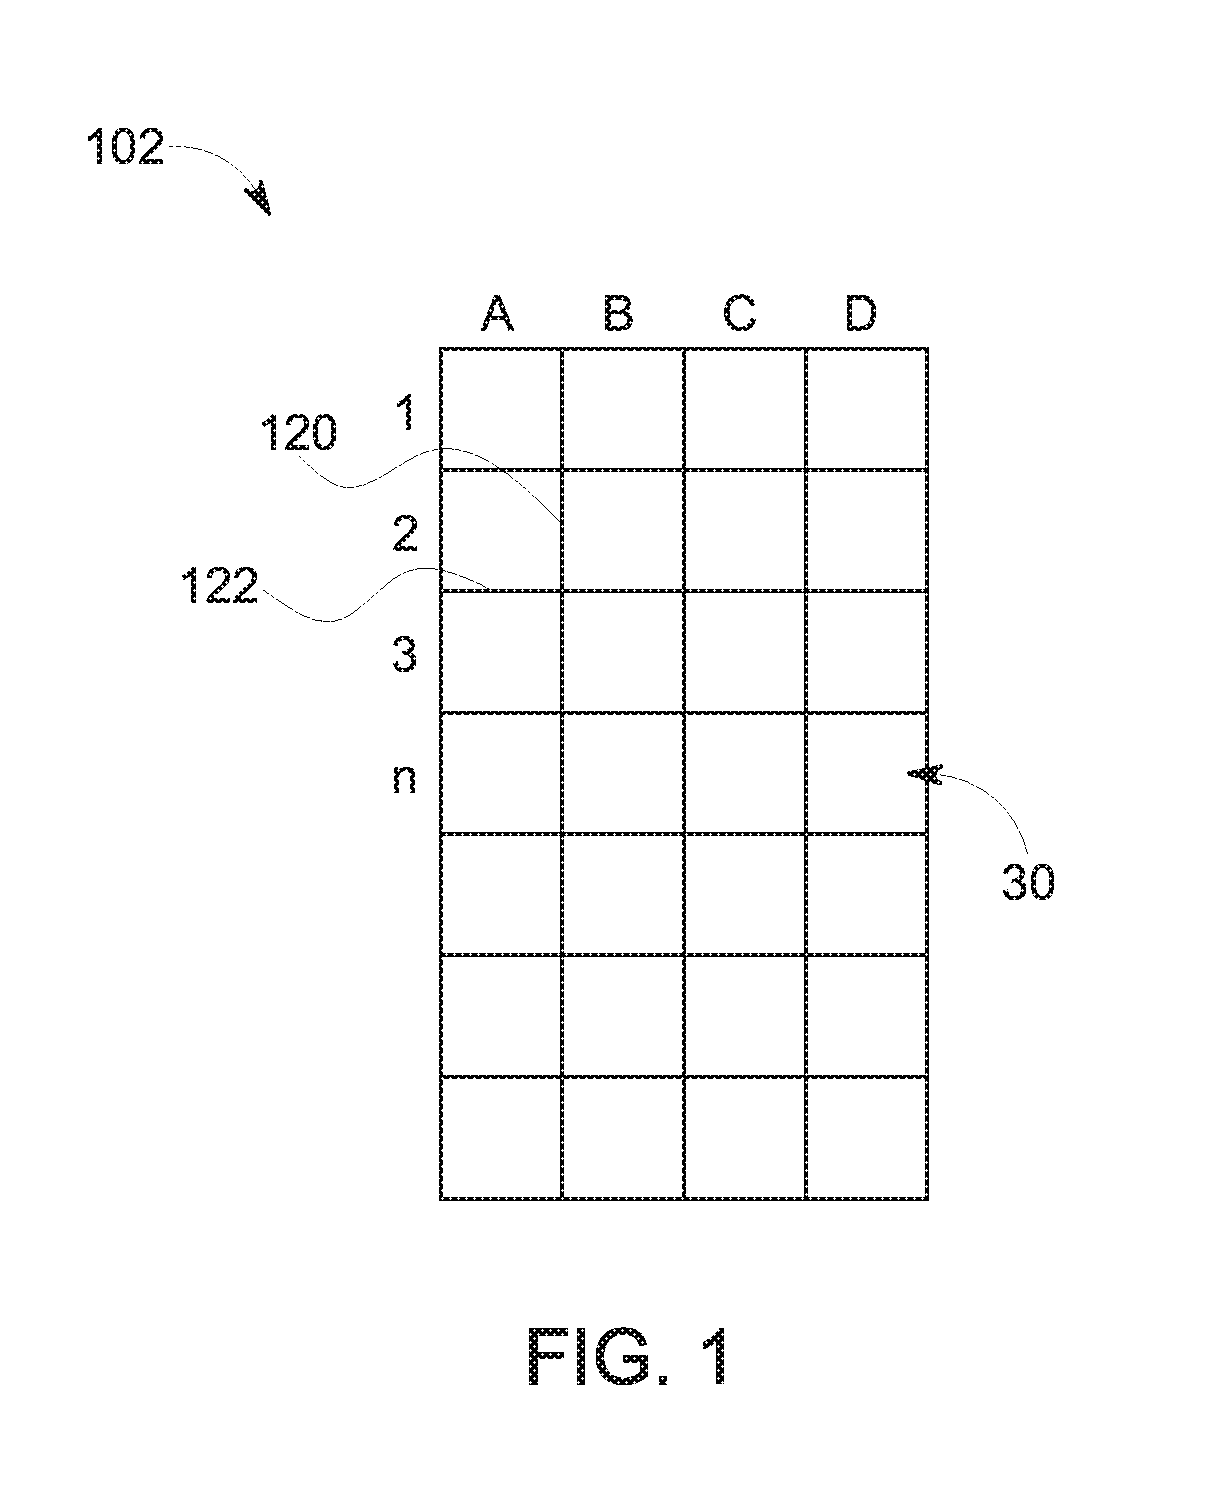 Sensing device for controlling the delivery of care to immobile patients